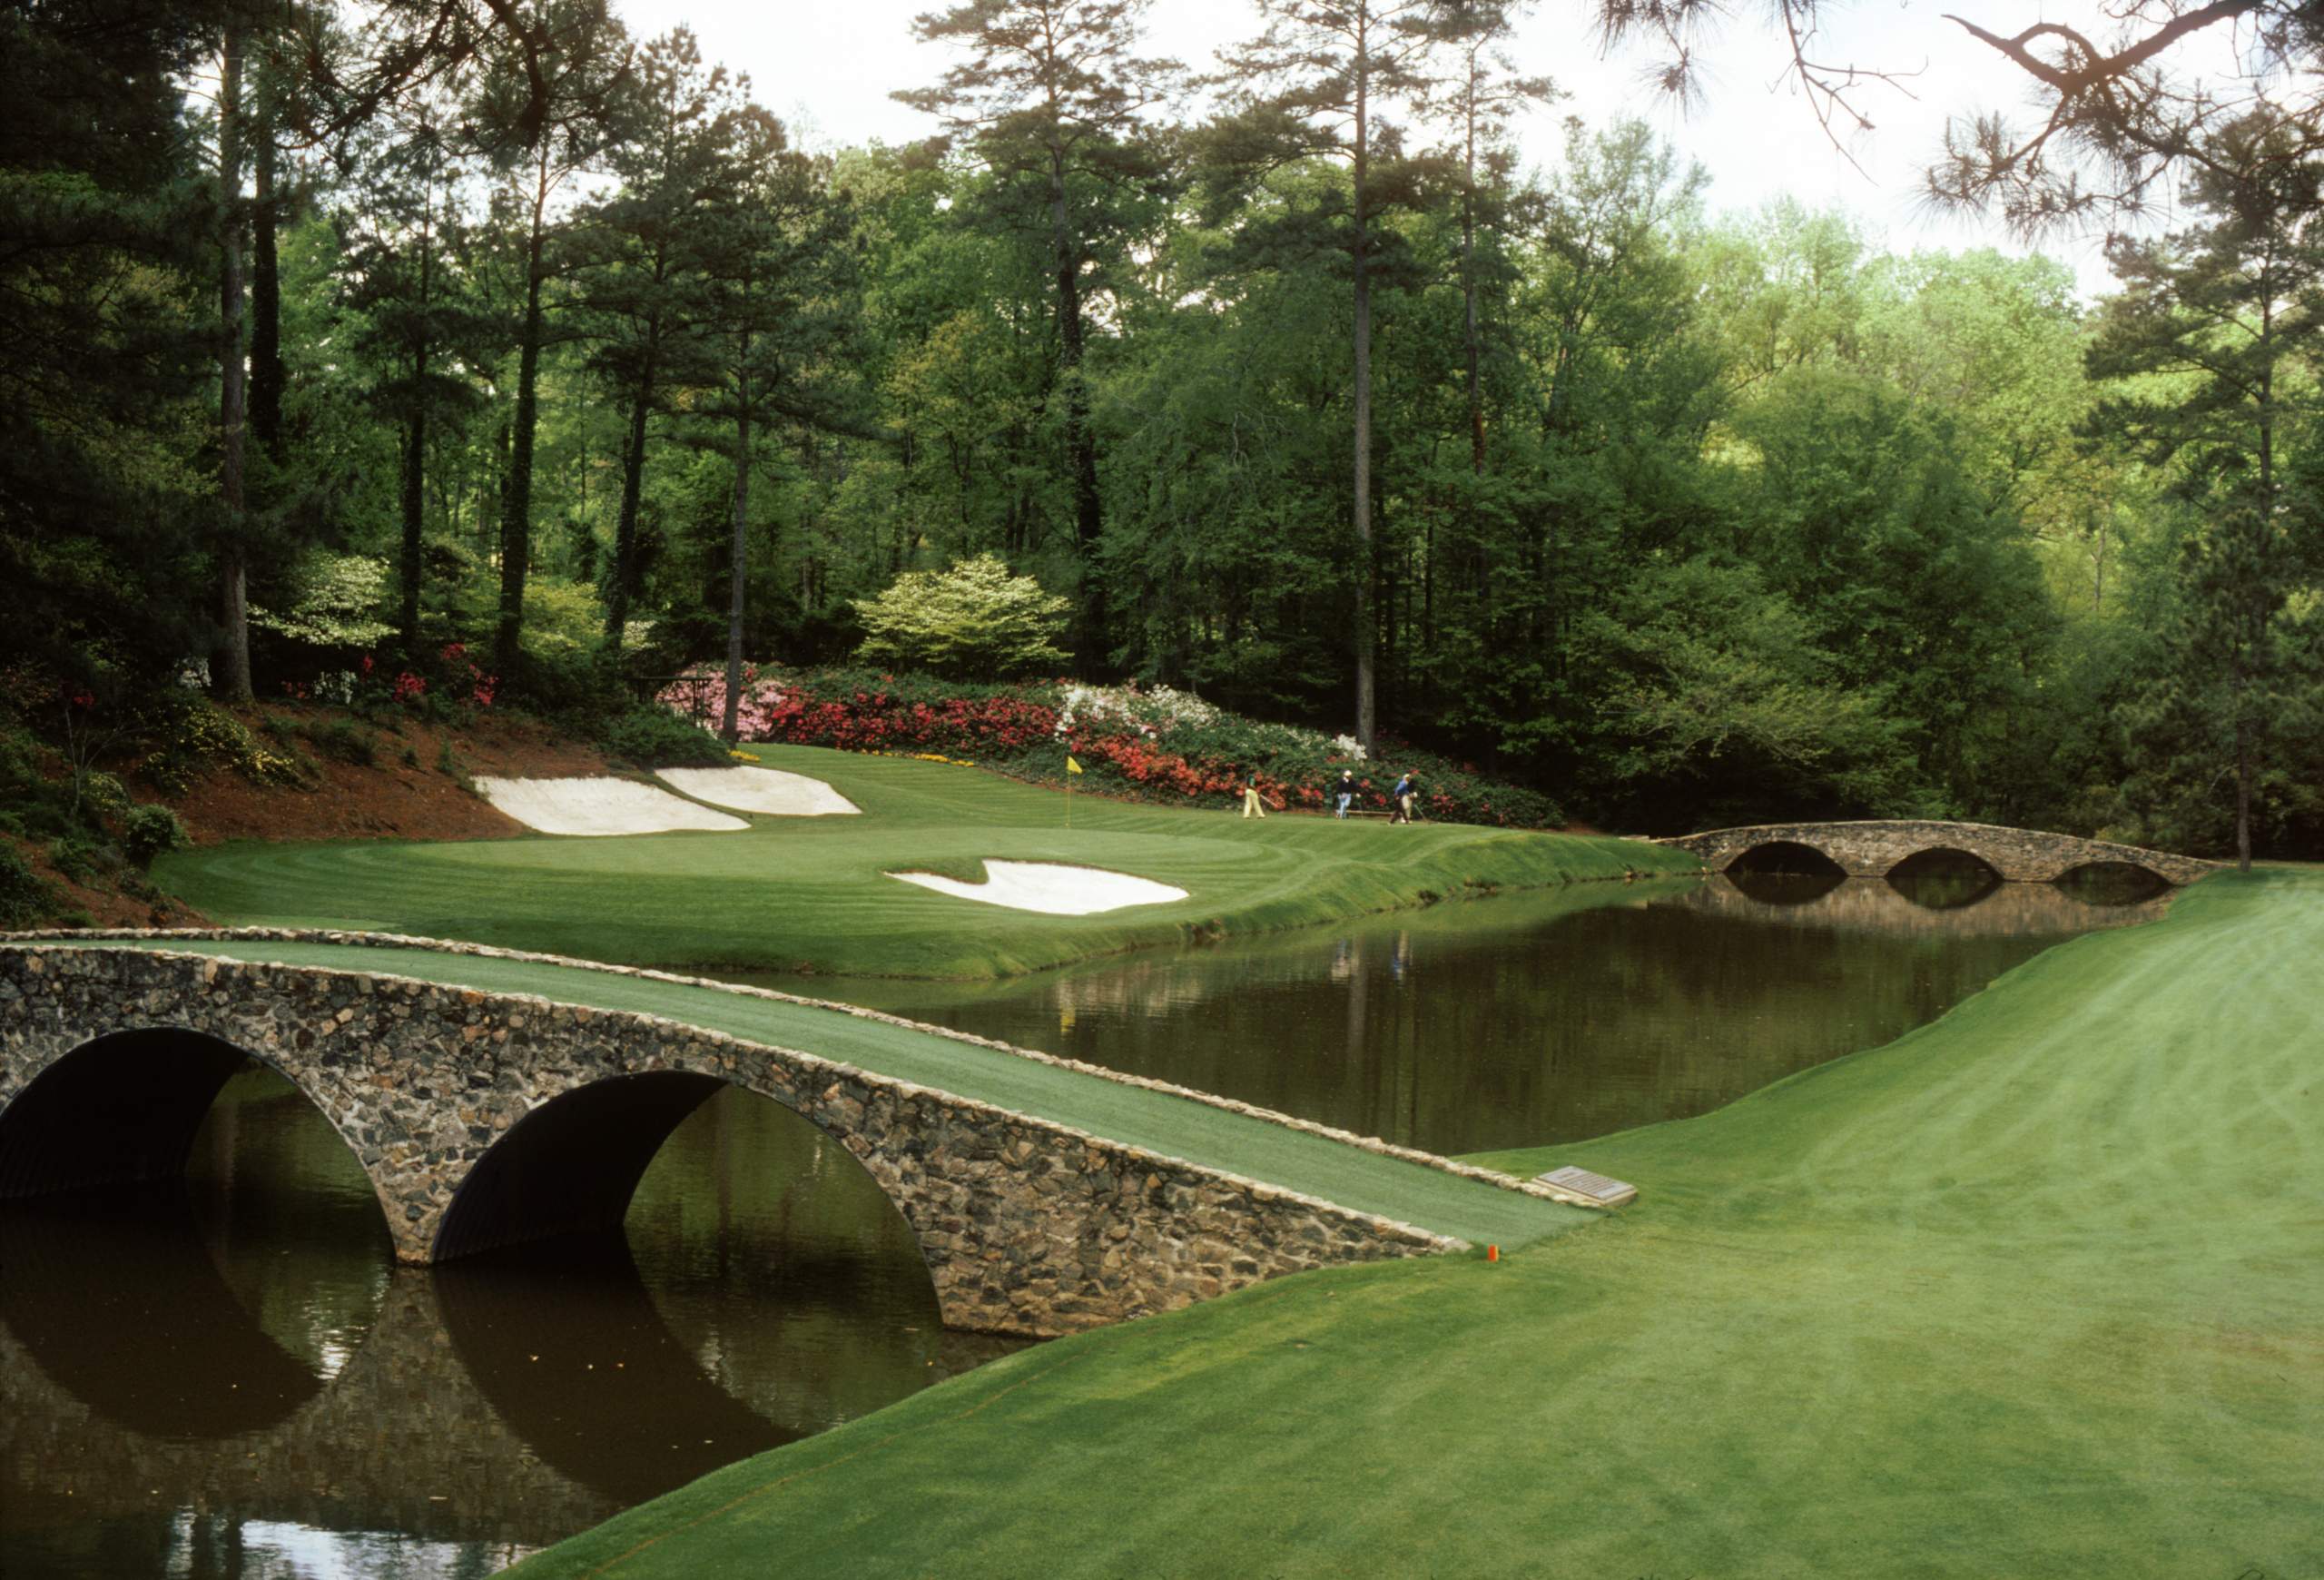 <em><b>Course Location: Augusta, Georgia</b></em> Augusta National, home to The Masters. Need I say more? Augusta has hosted The Masters since 1934 -- only skipping three years during World War II. With the tournament held the first full week of April each year, fans flock to Georgia for golf's most spectacular event in hopes of witnessing history. Some of golf's greatest golfers have owned Augusta over the years. Sam Snead, Gary Player, Phil Mickelson, Nick Faldo, and Jimmy Demaret have claimed the Green Jacket three times. Arnold Palmer won four of his own, and the great Tiger Woods has slayed The Masters five times -- most recently in 2019.